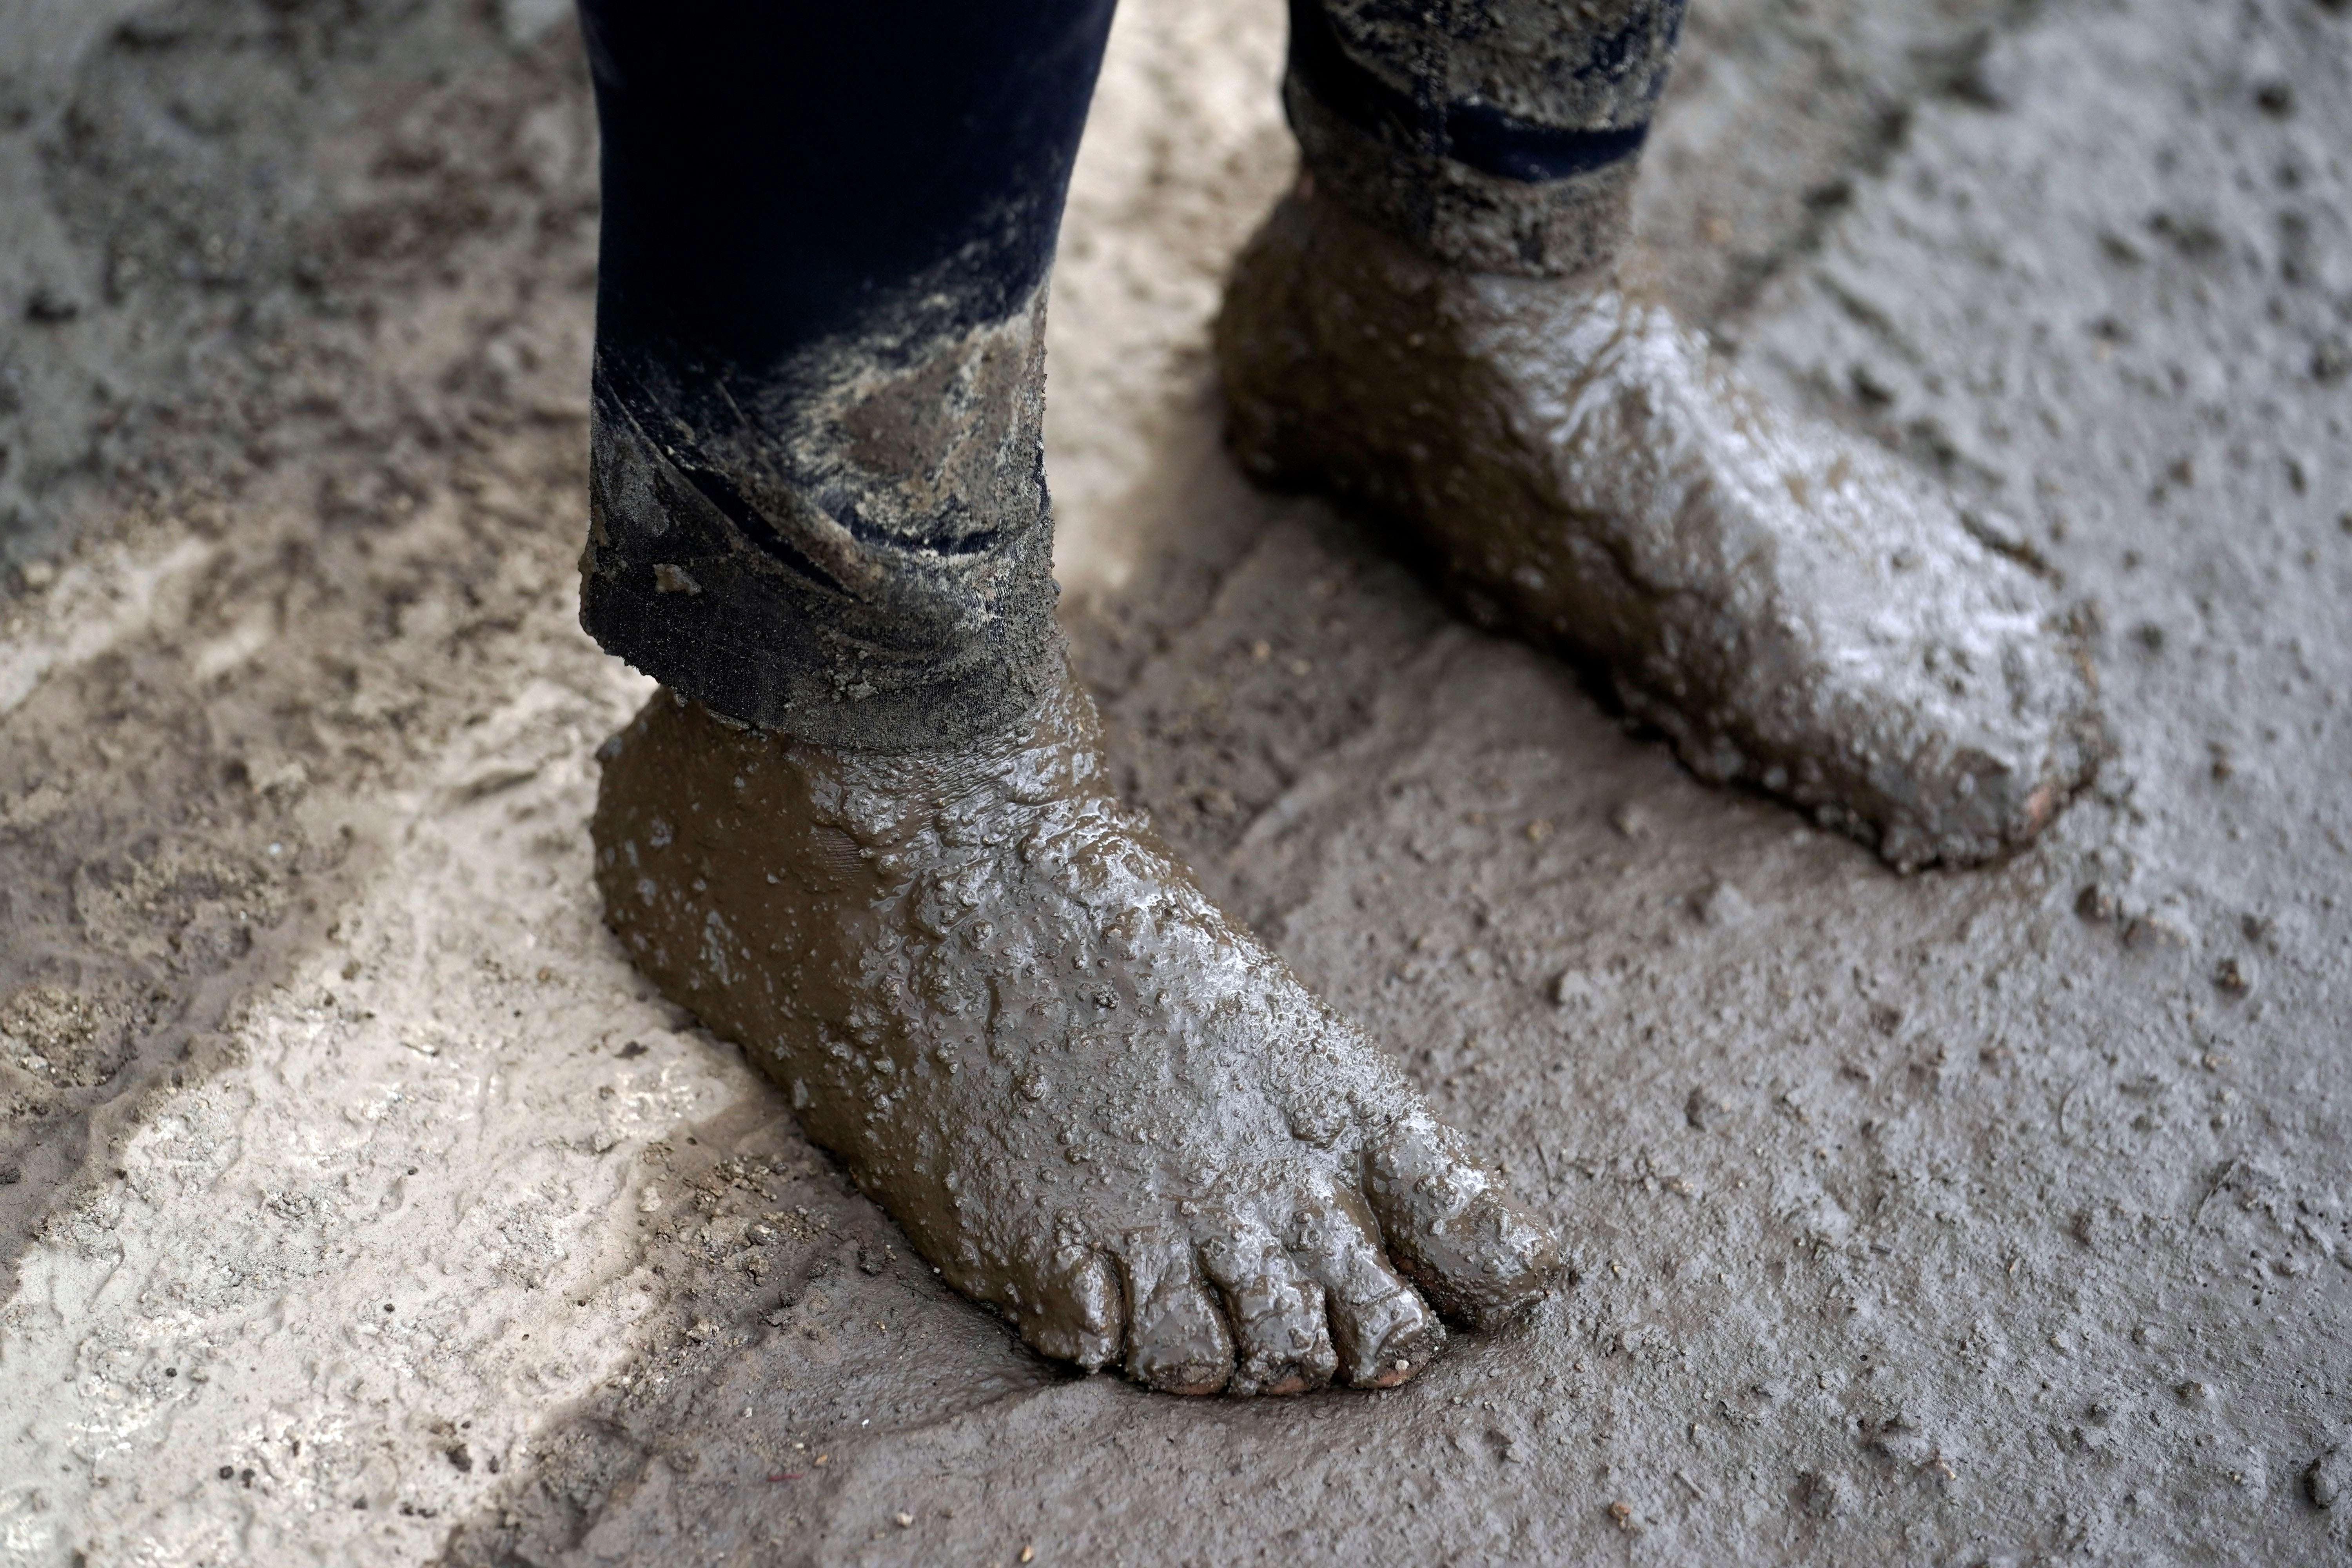 Local resident Perla Halbert's feet, covered in mud after she unsuccessfully tried to reach her property in the aftermath of a mudslide on Tuesday, Sept. 13, 2022, in Oak Glen, California.  (Photo: Marcio Jose Sanchez, AP)